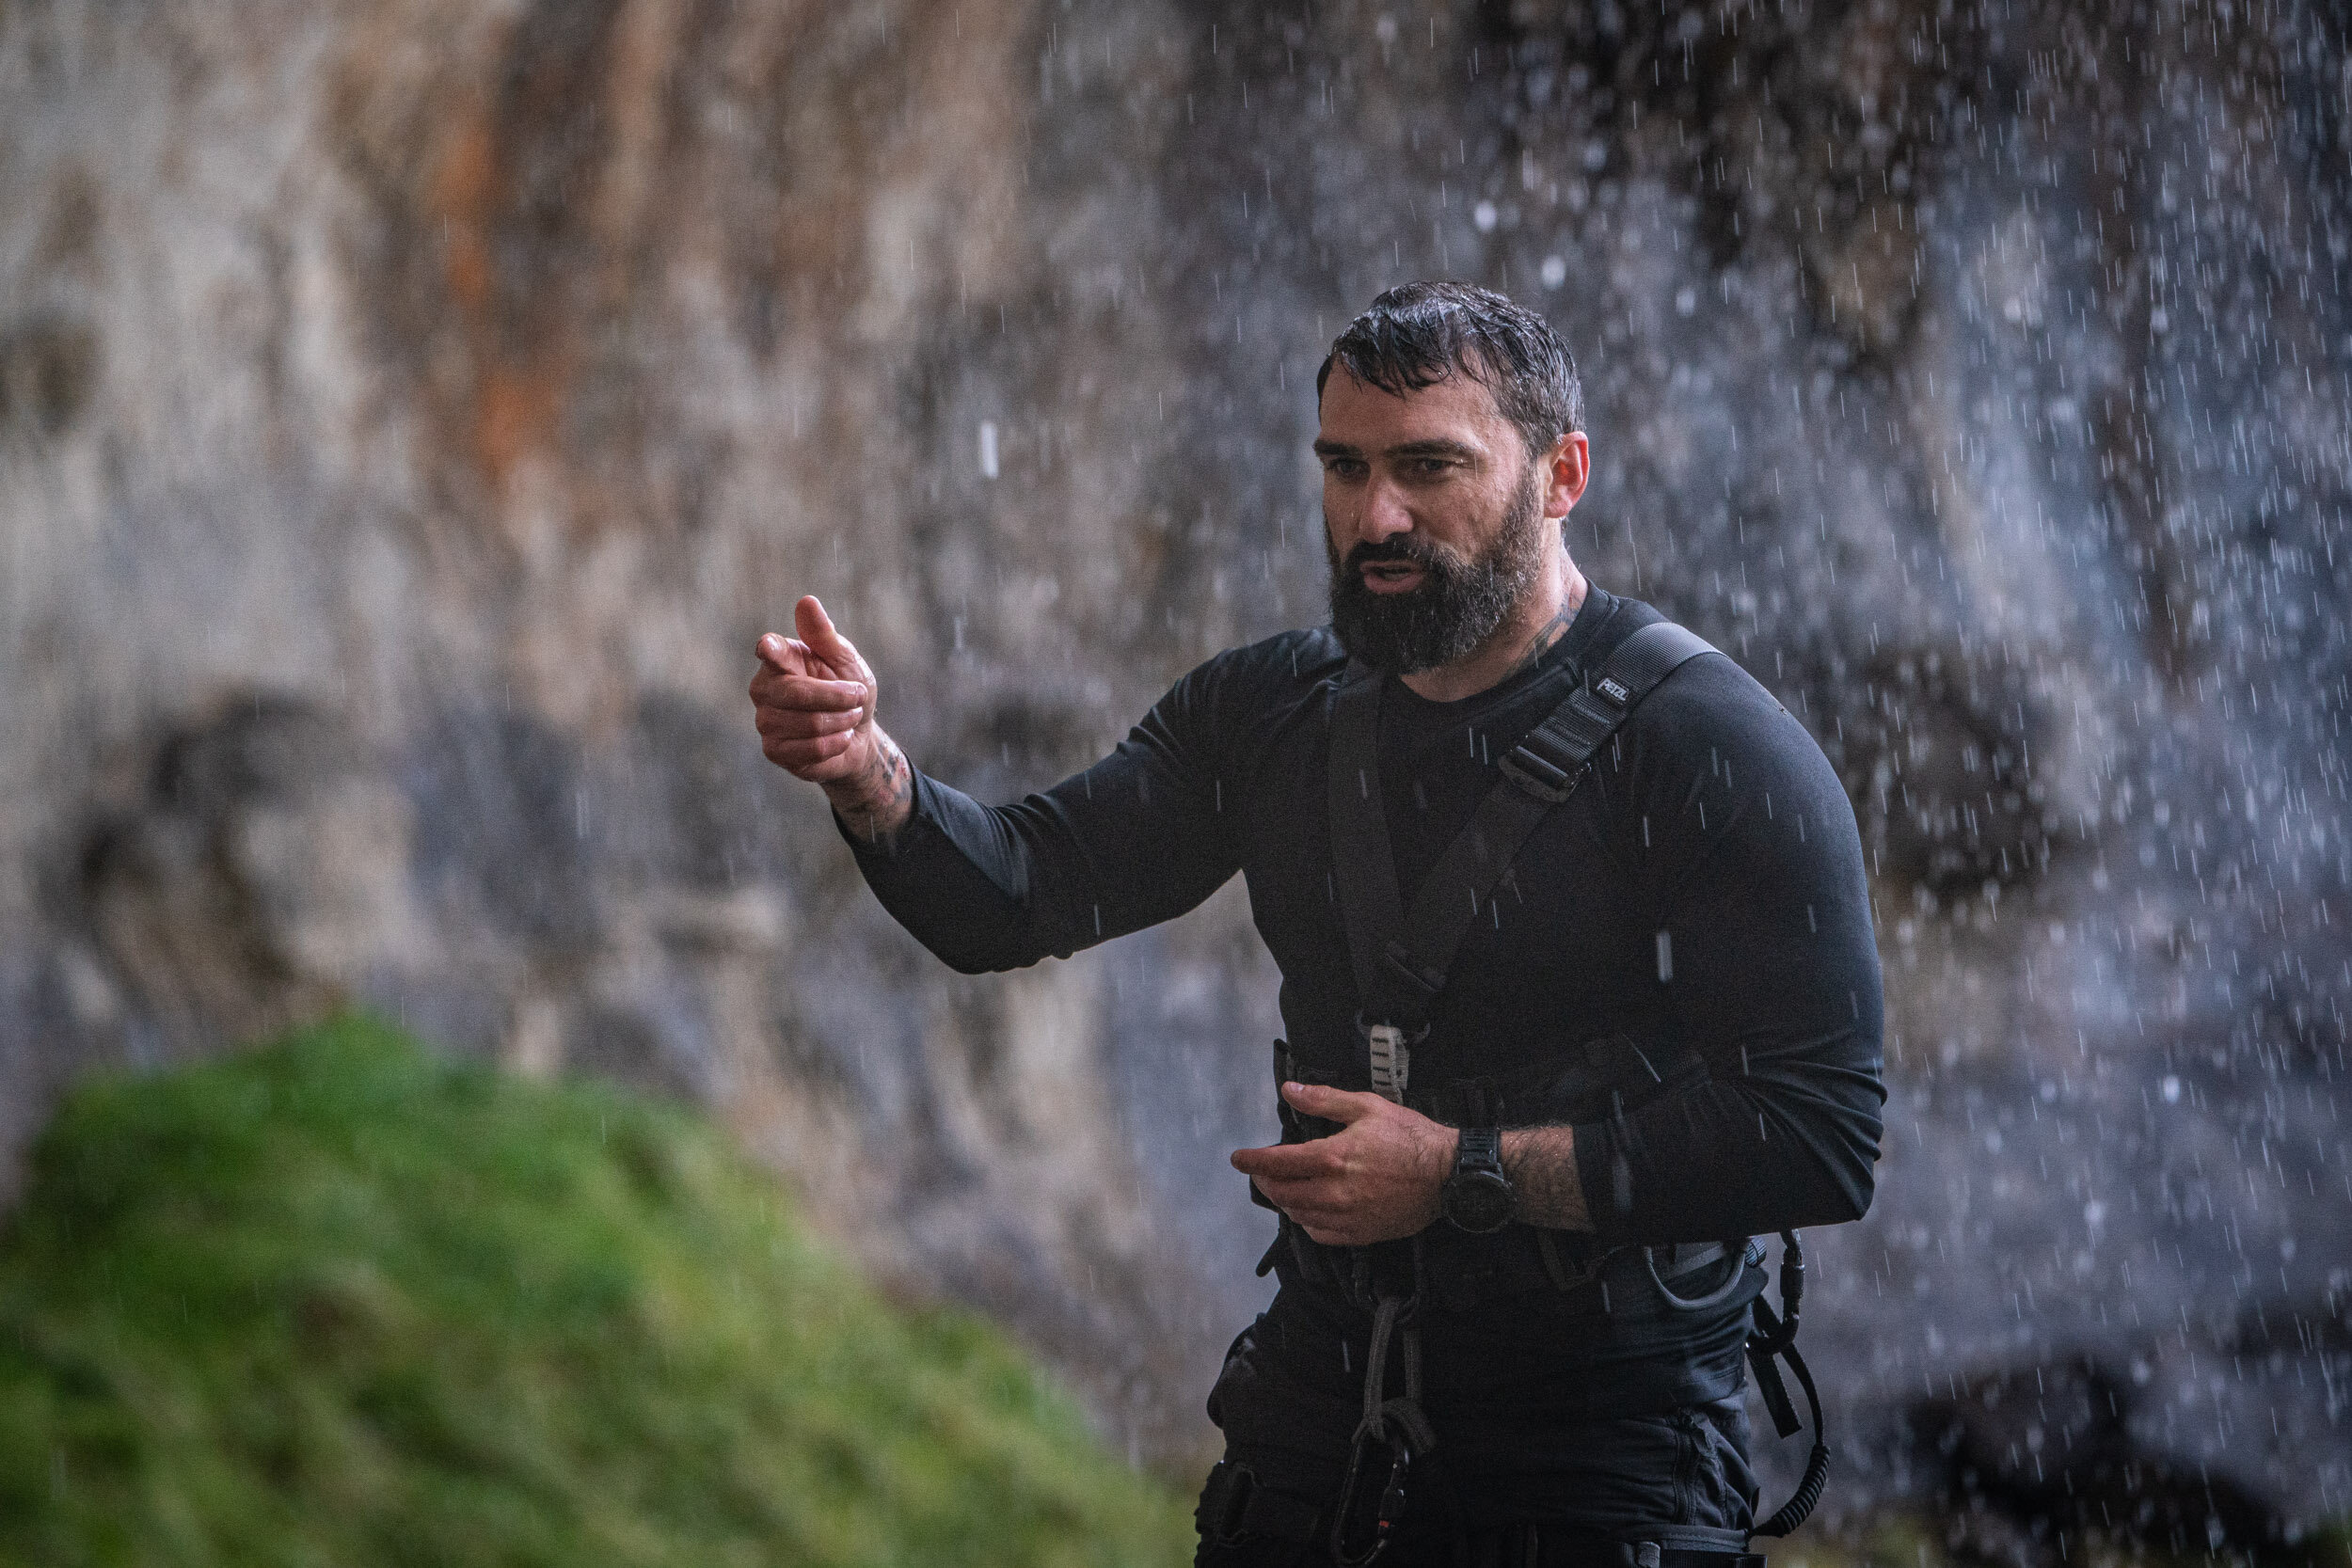  Chief Instructor Ant Middleton  Episode 1 - Discipline  Minnow Films / Channel 4 